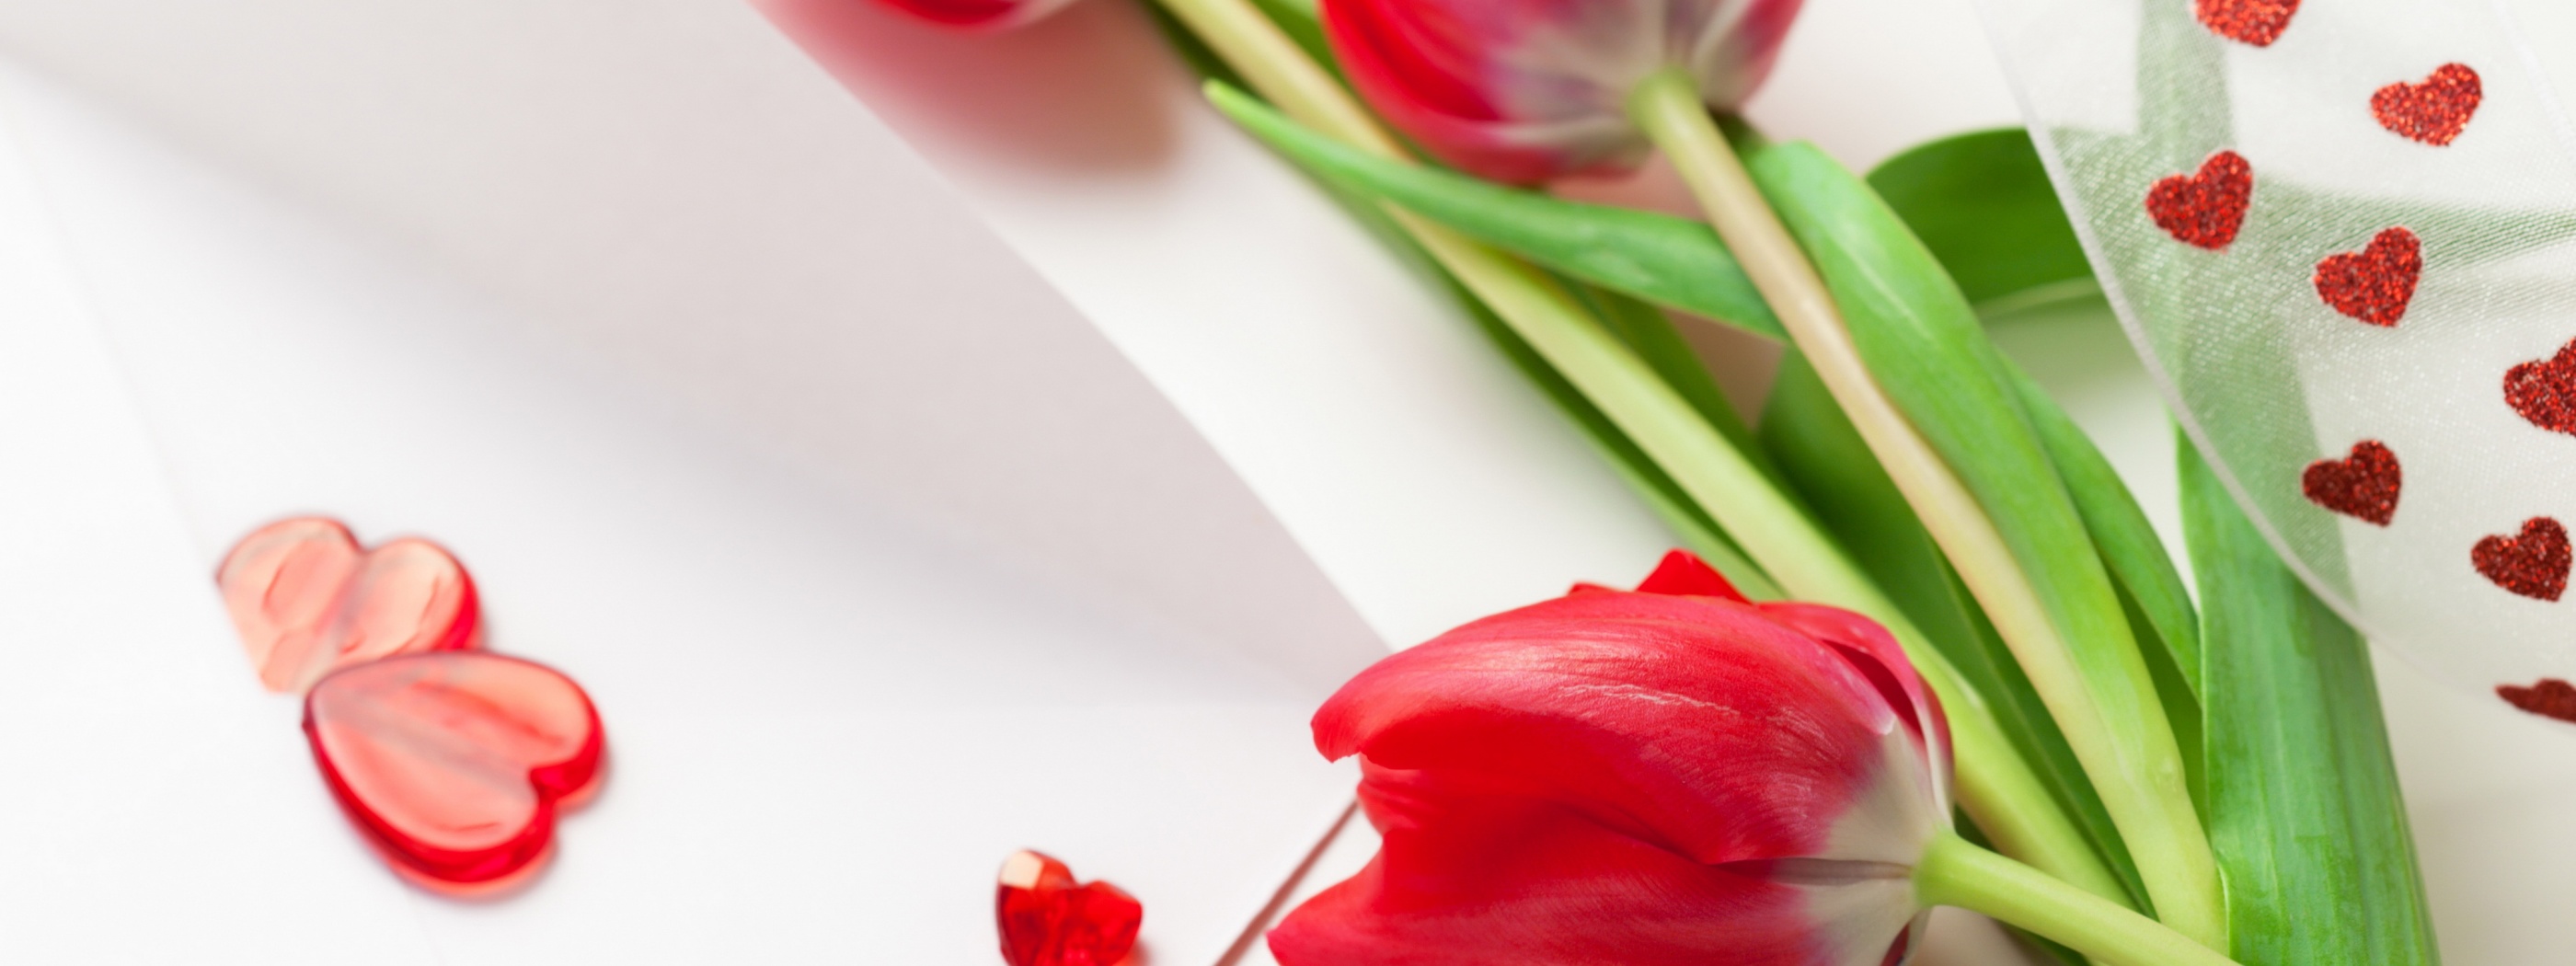 Red Tulips For Womens Day